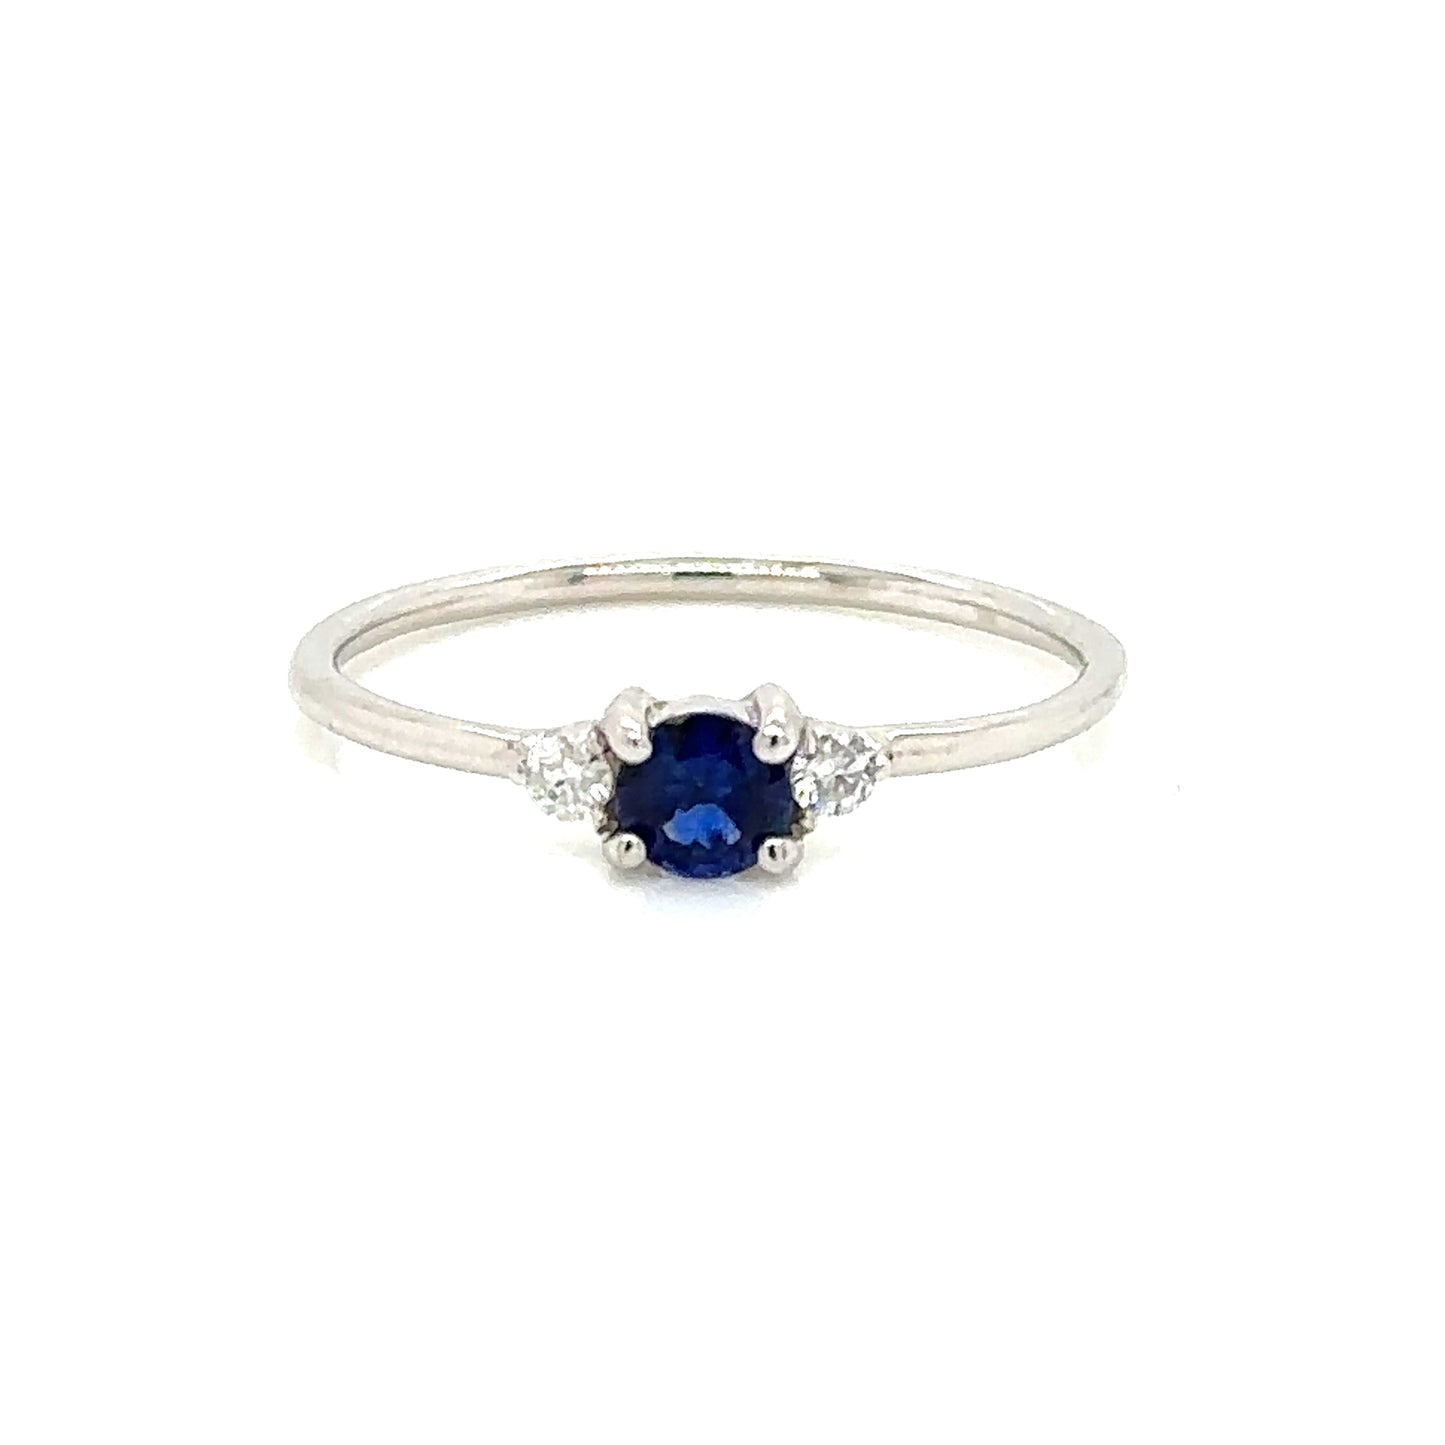 IMMEDIATE DELIVERY / Half Ring Stone of the Month / Sapphire and Diamonds / 14k white gold / Size 6